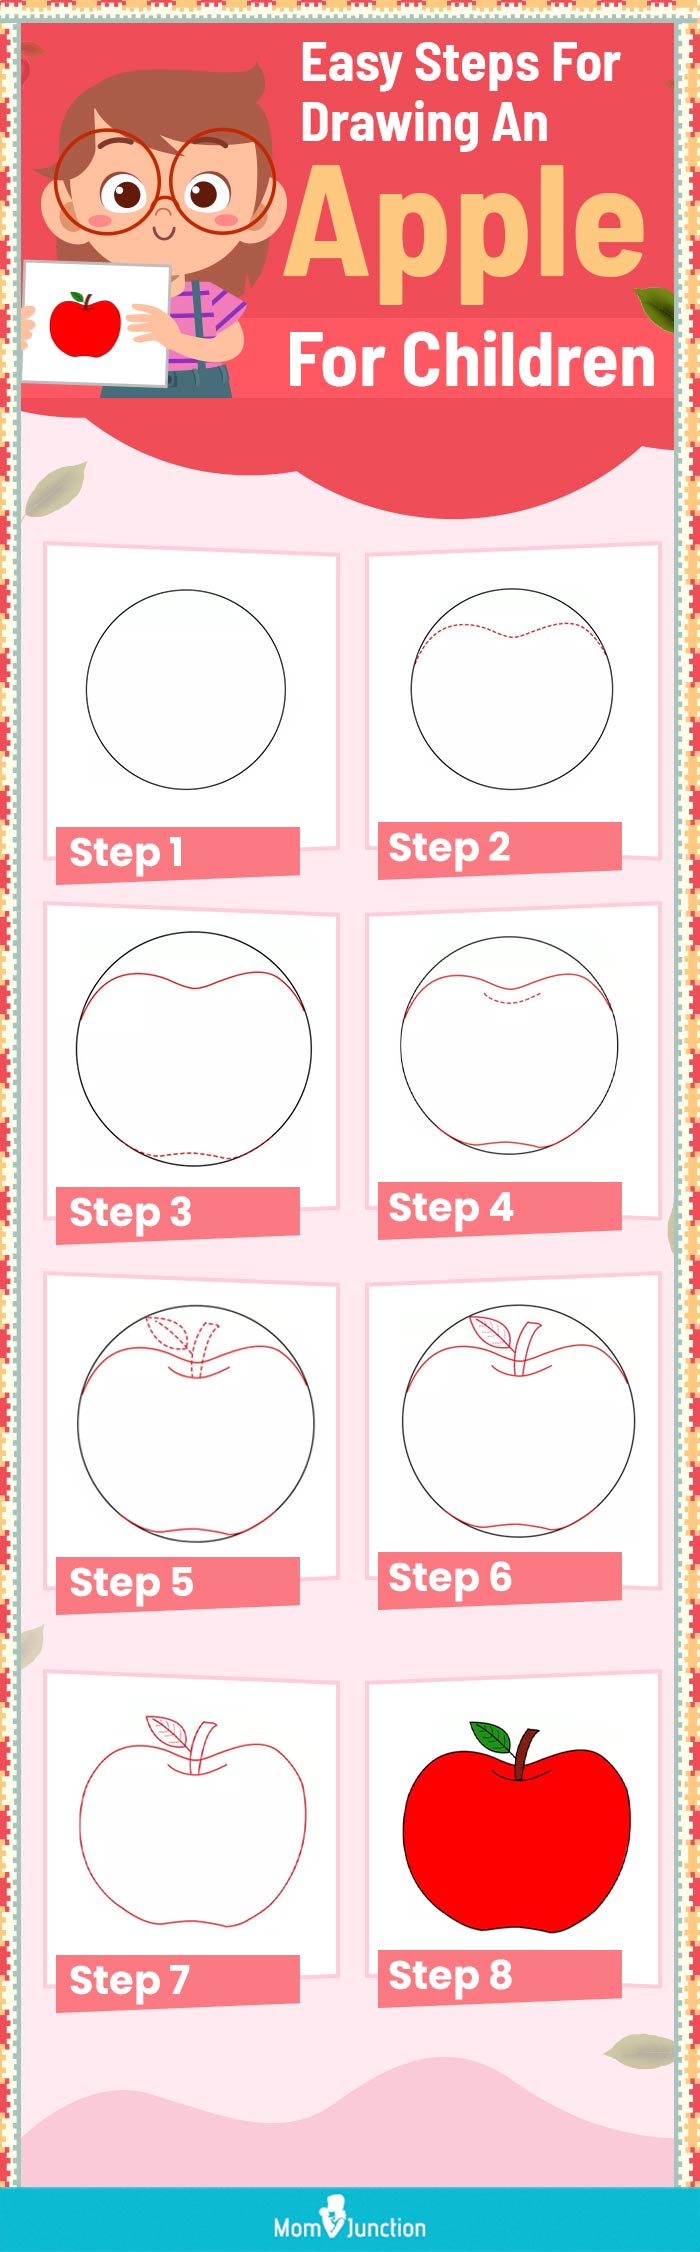 easy steps for drawing an apple for children (infographic)